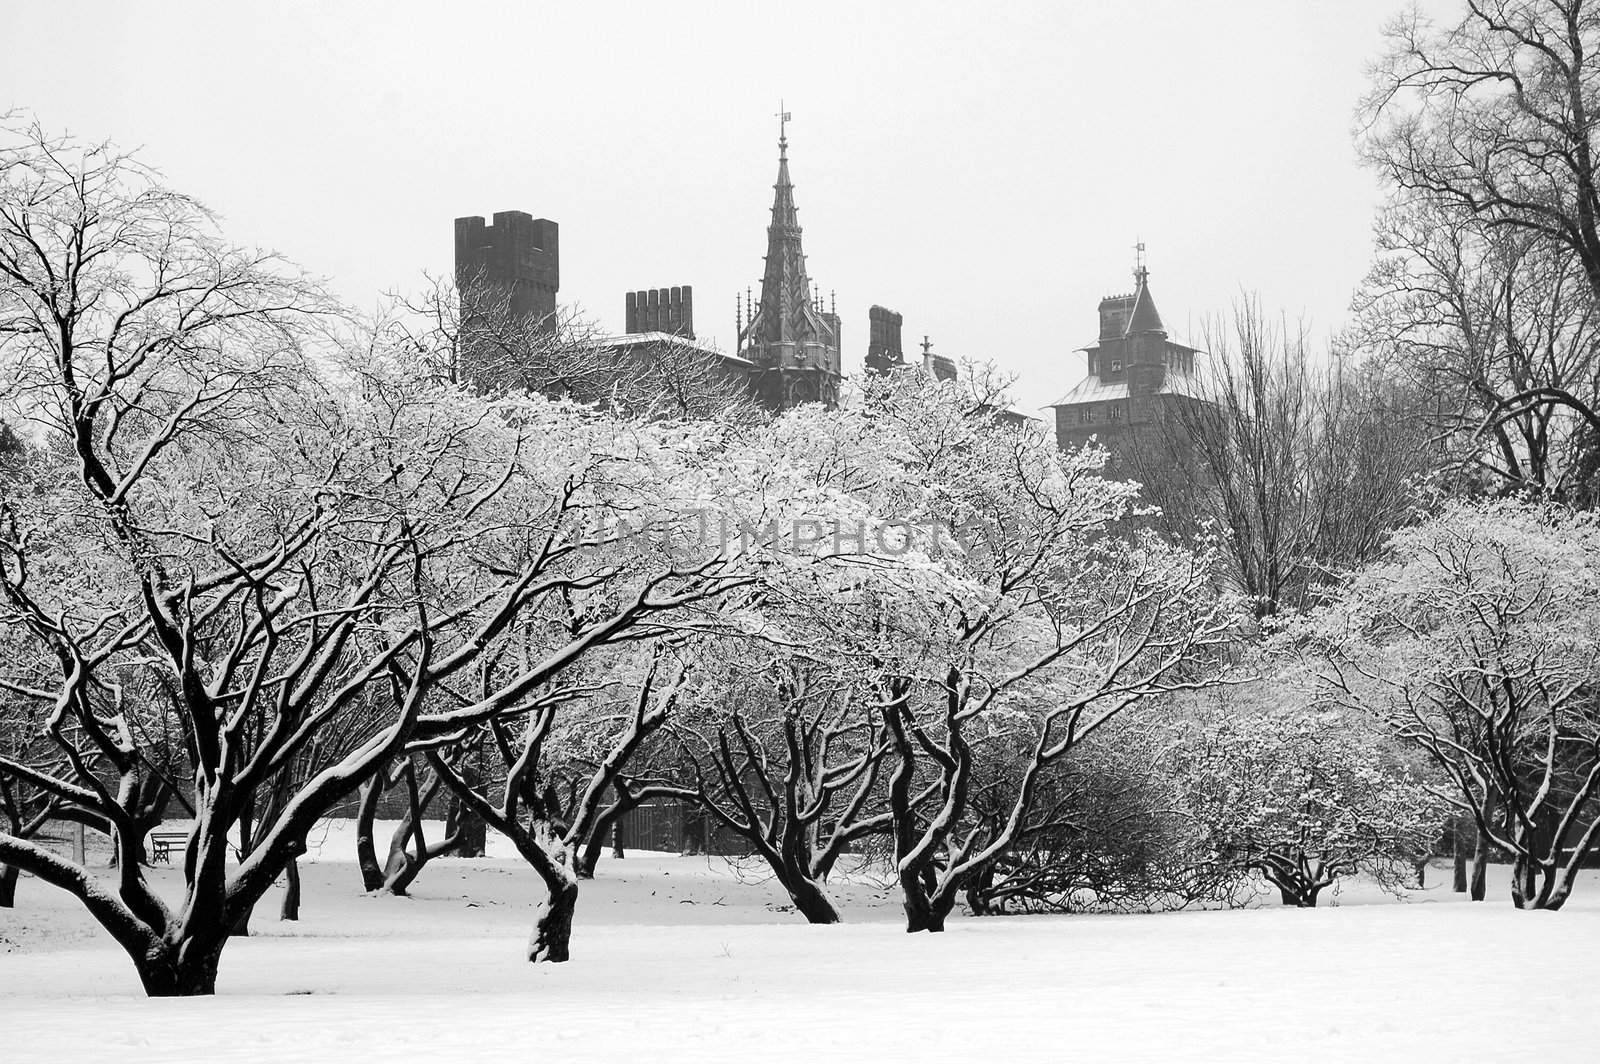 Cardiff's Bute park covered under snow with castle